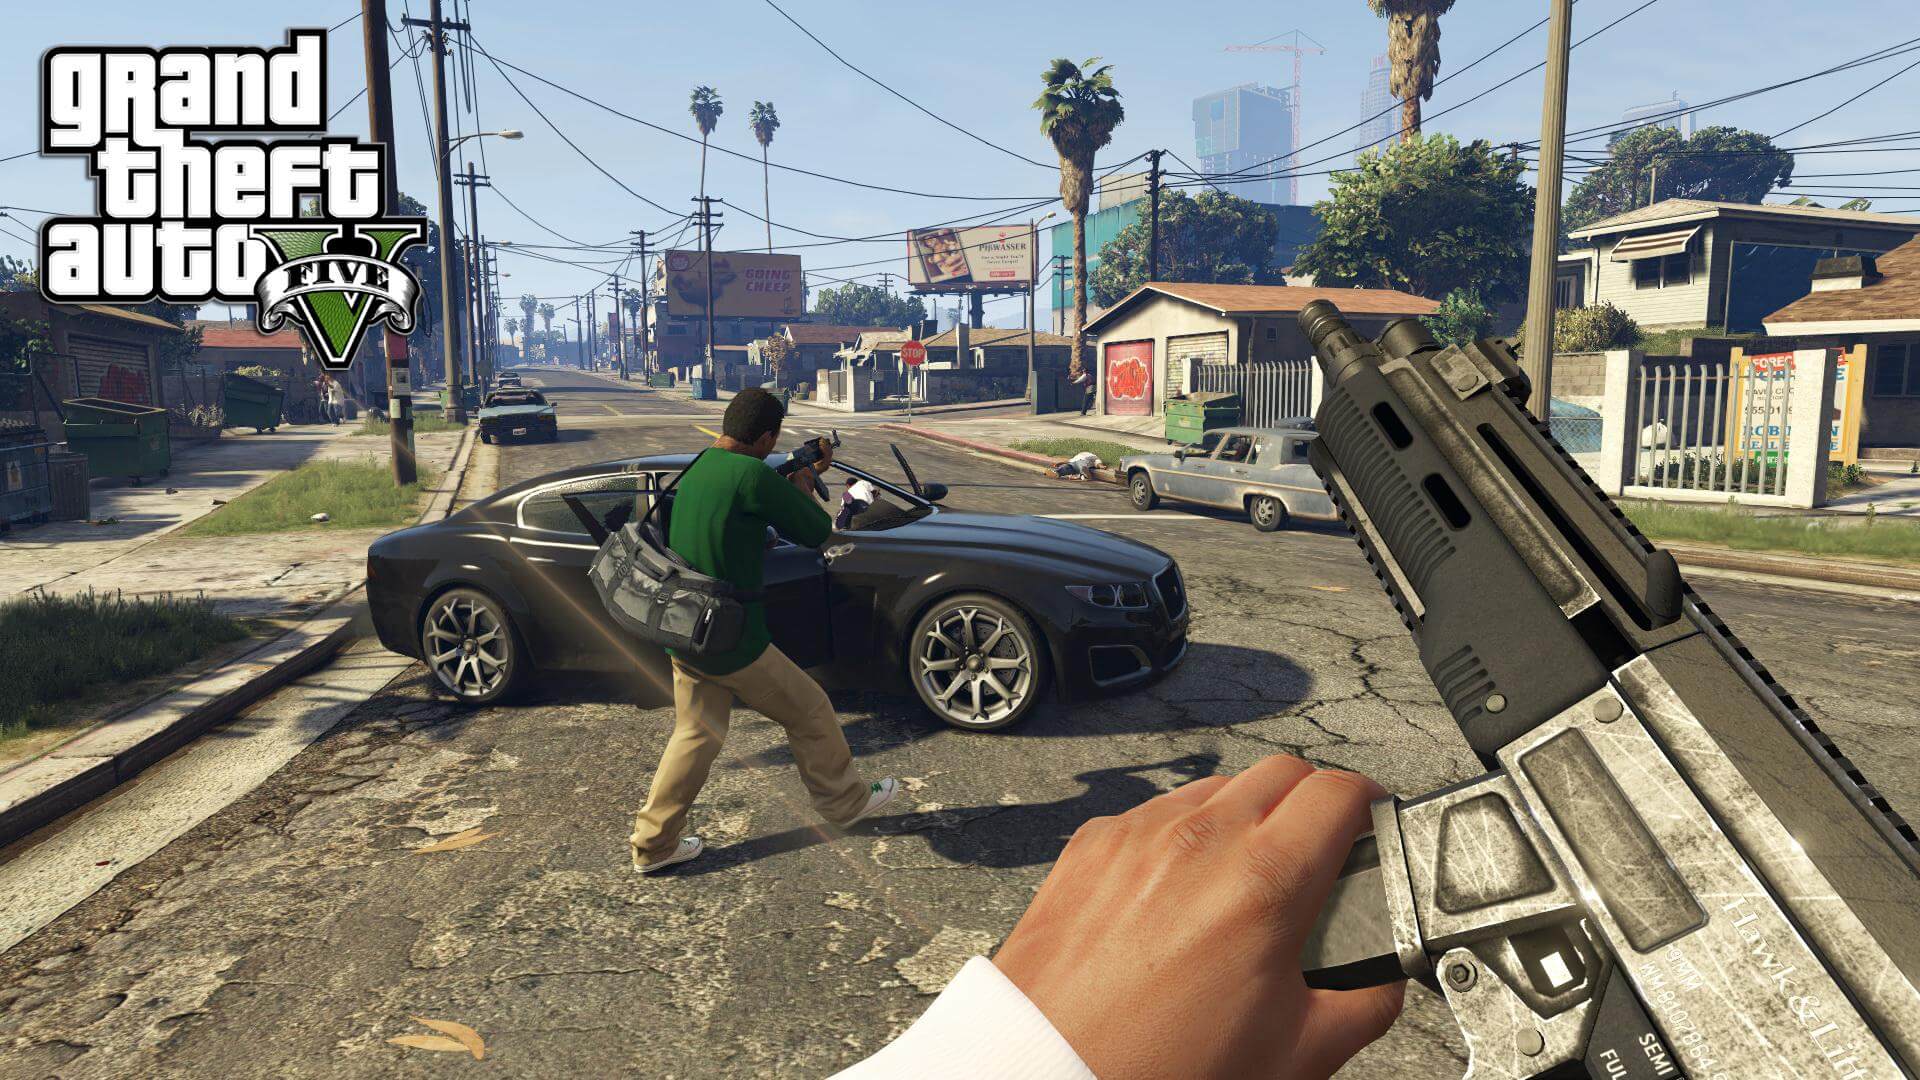 gta 5 full game download for pc kickass